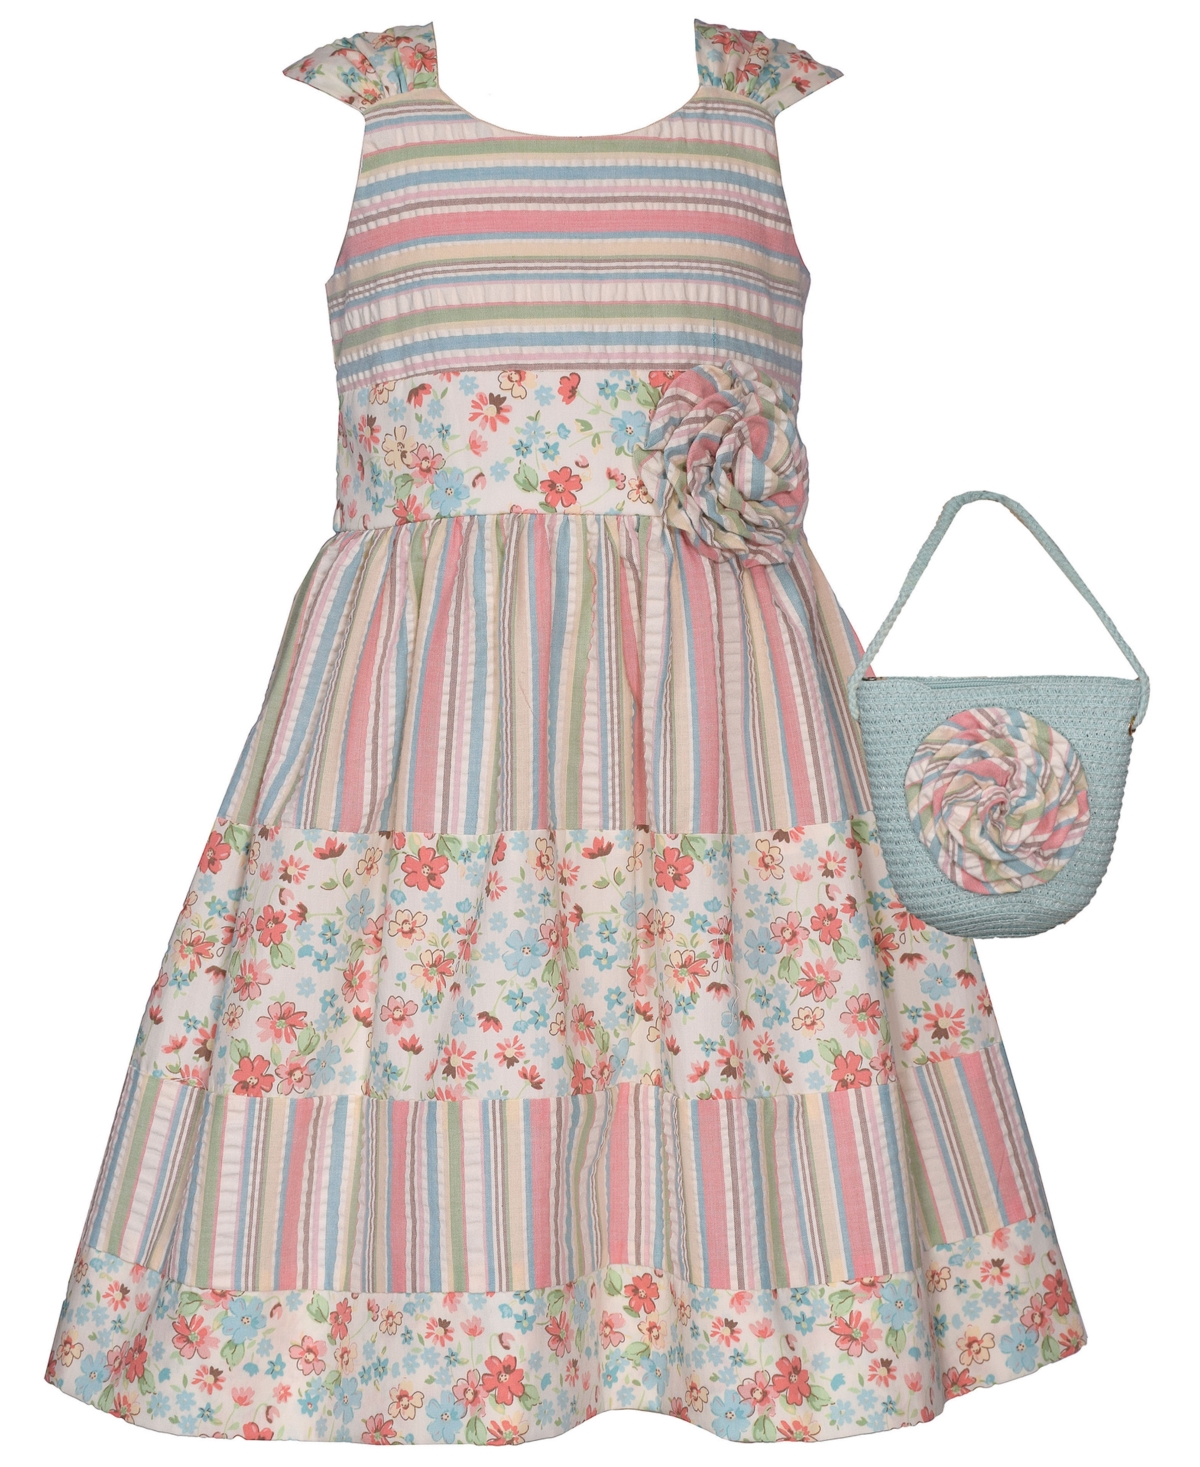 Shop Bonnie Jean Toddler Girls Sleeveless Seersucker And Cotton Print Dress And Matching Bag In Multi